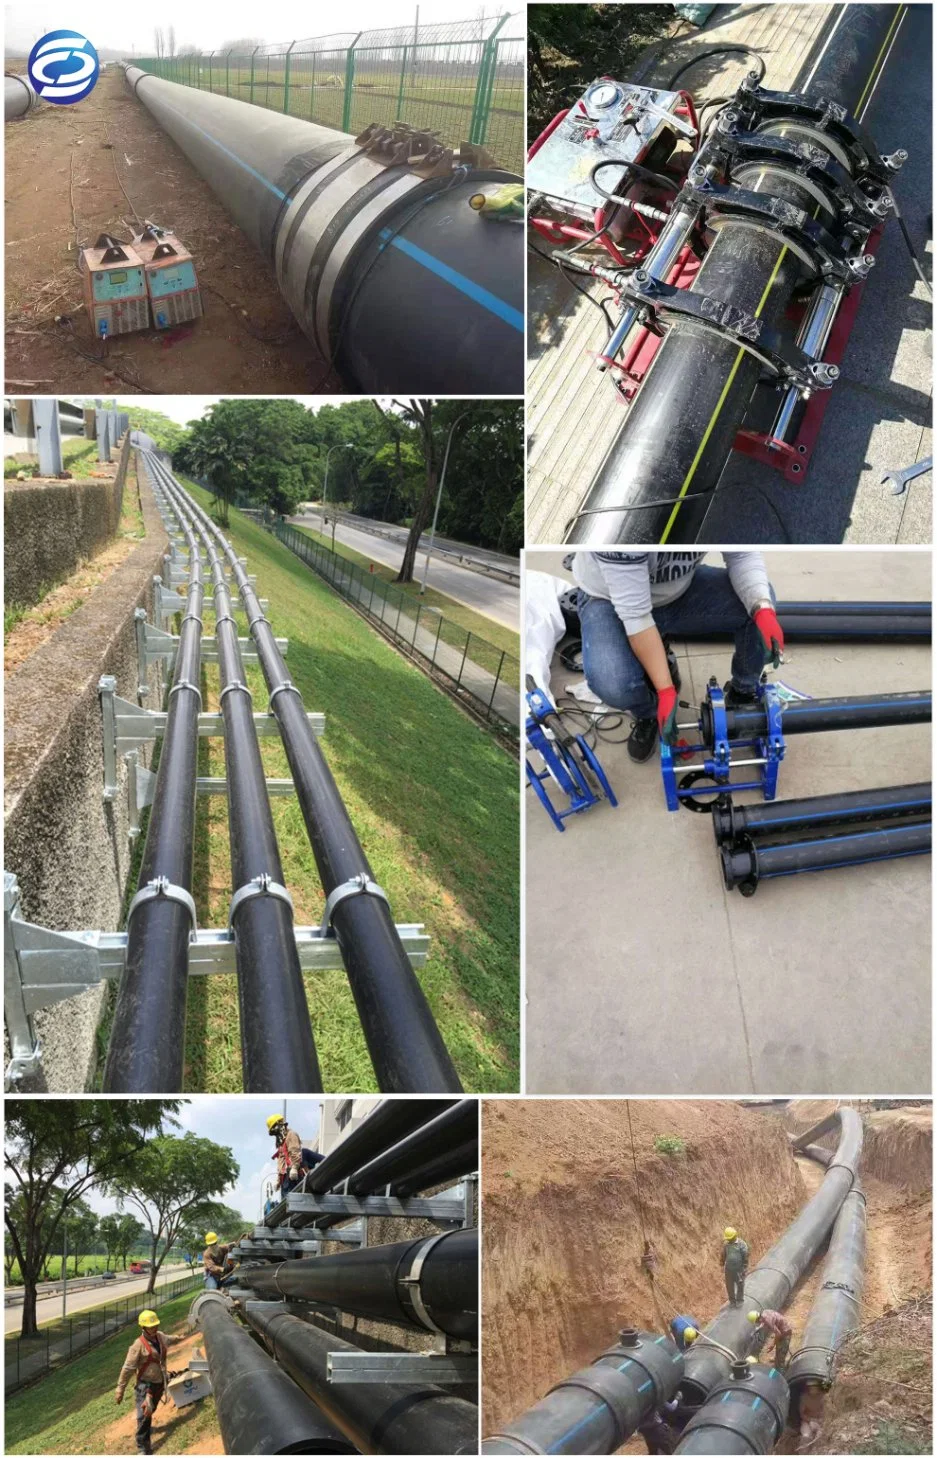 SDR21, SDR 17, SDR11, SDR9 HDPE/PE Pipe Plastic Water Pipe for Water Supply